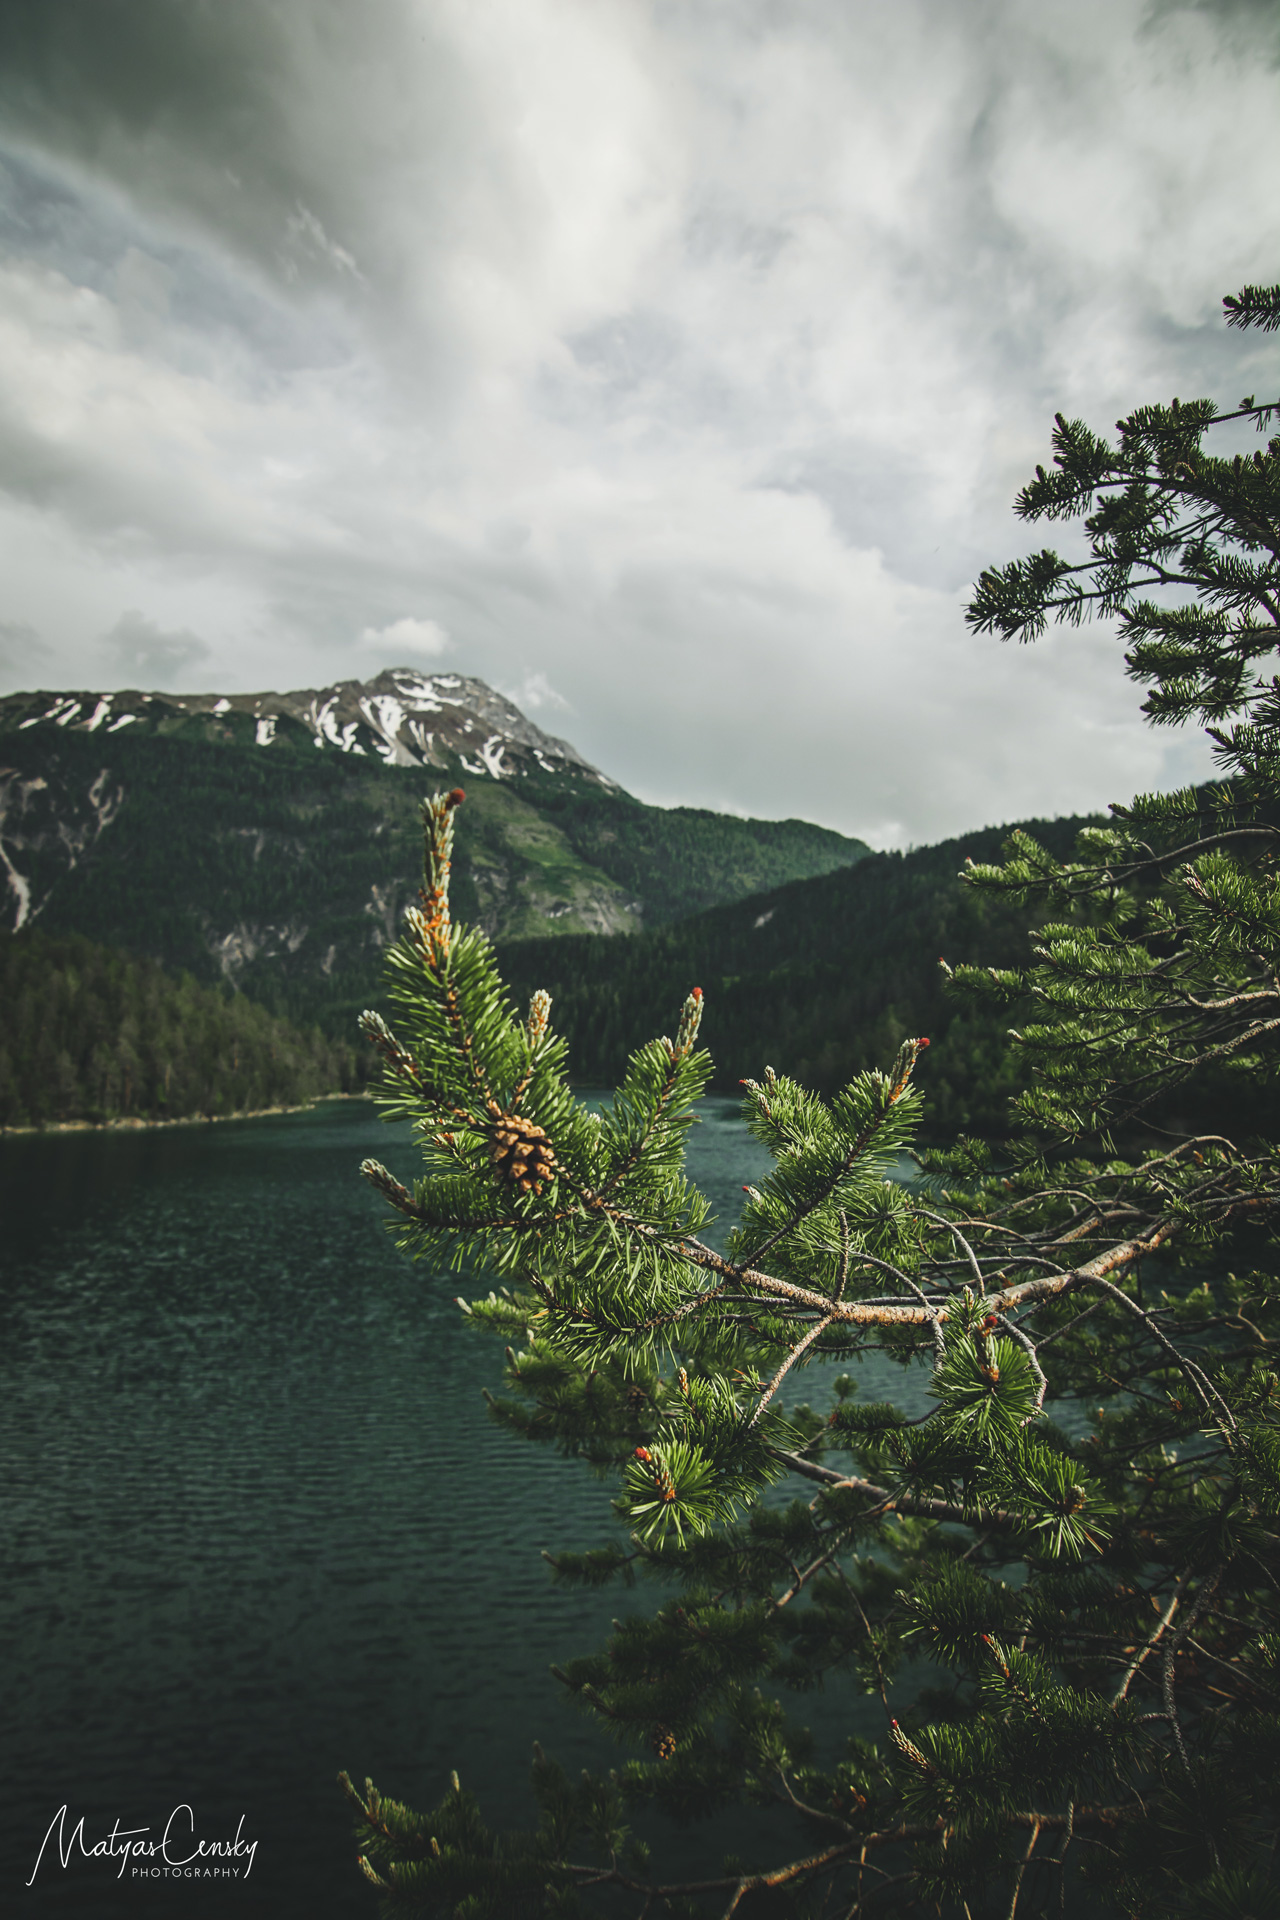 Photo of a branch with a pinecone pointing to a top of a mountain in the background, taken near Blindsee, Austria.